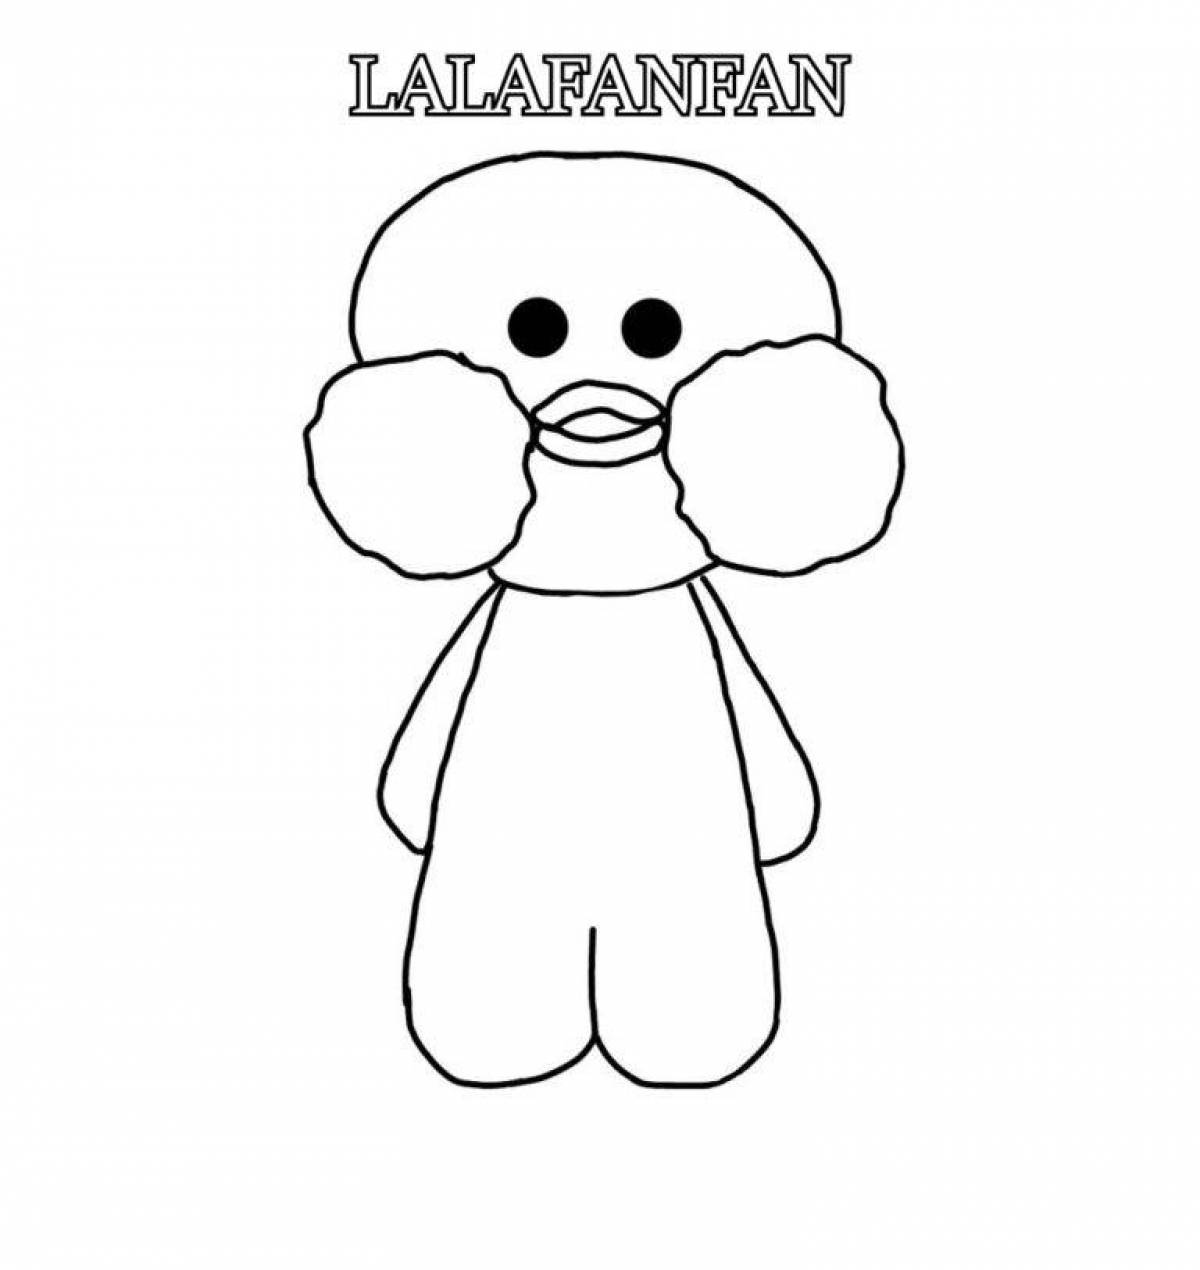 Lalafanfan humorous duck coloring page